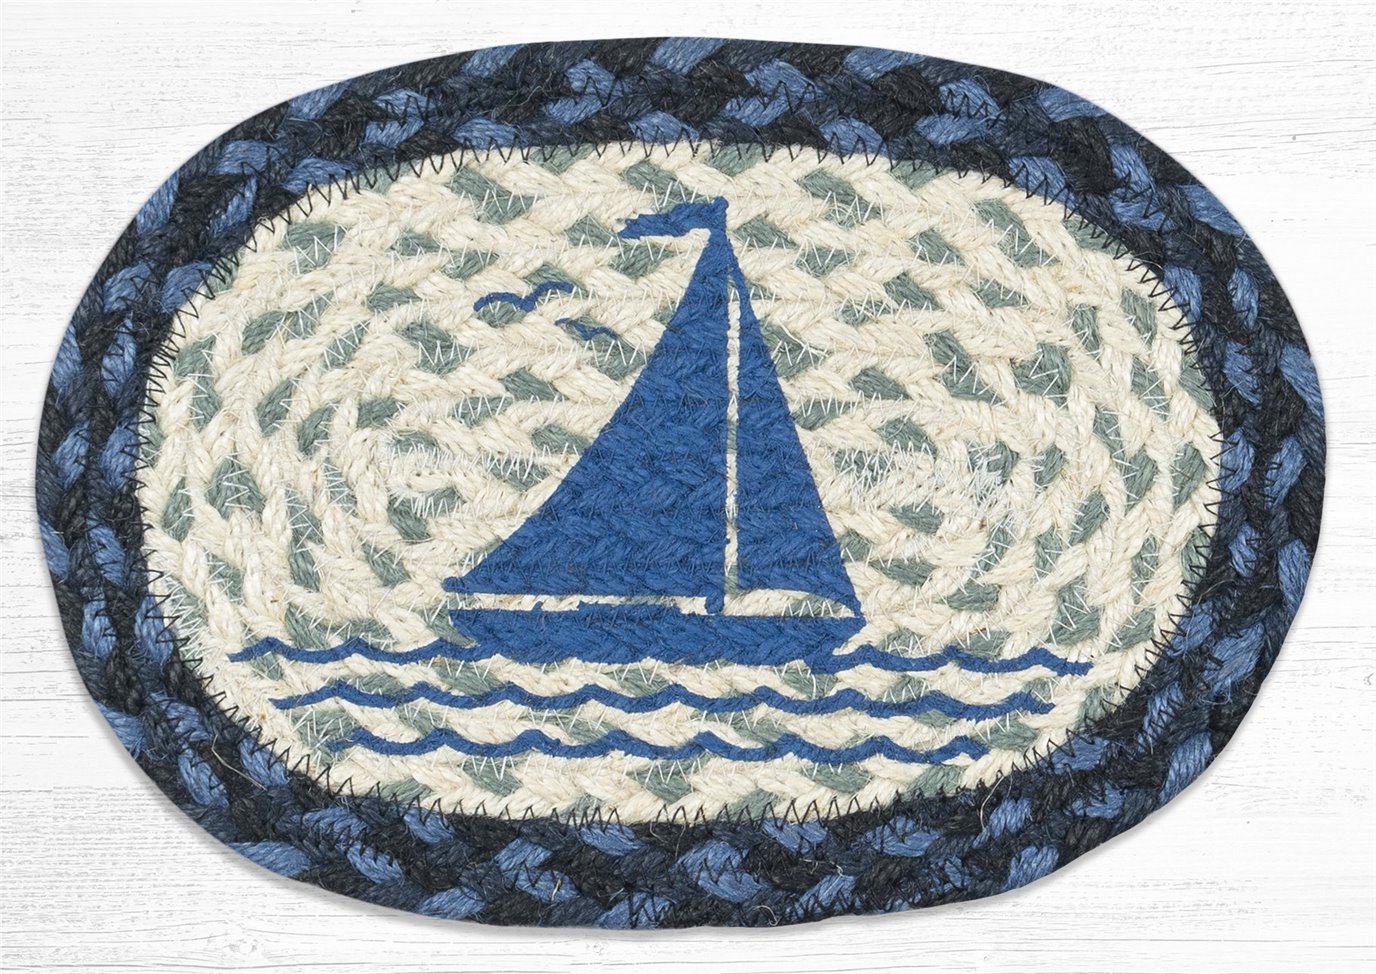 Sailboat Printed Oval Braided Swatch 7.5"x11"